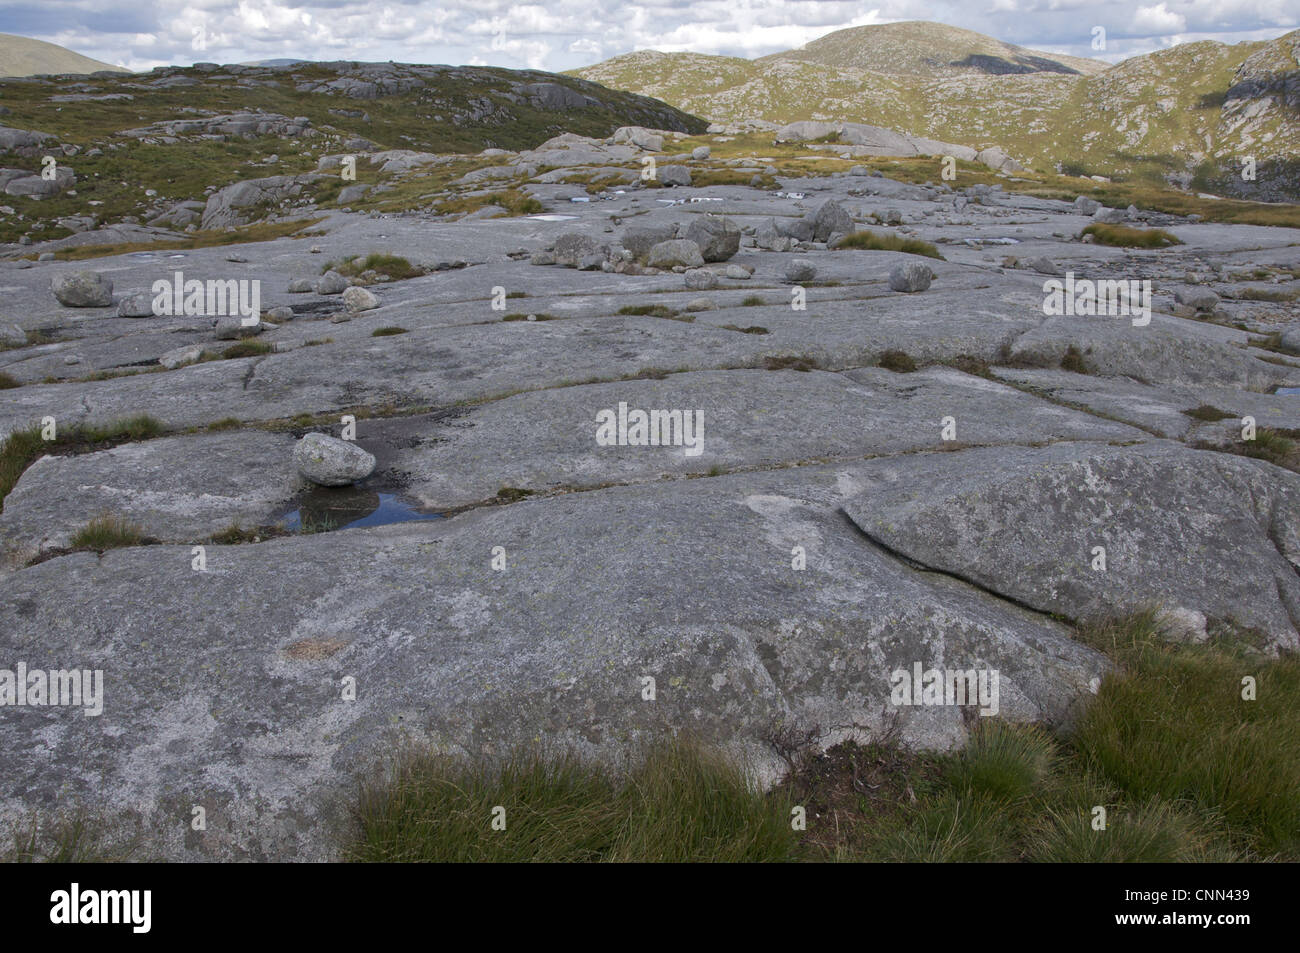 Granite boulders on granite slabs, The De'il's Bowling Green, Craignaw, Galloway Hills, Dumfries and Galloway, Scotland, august Stock Photo